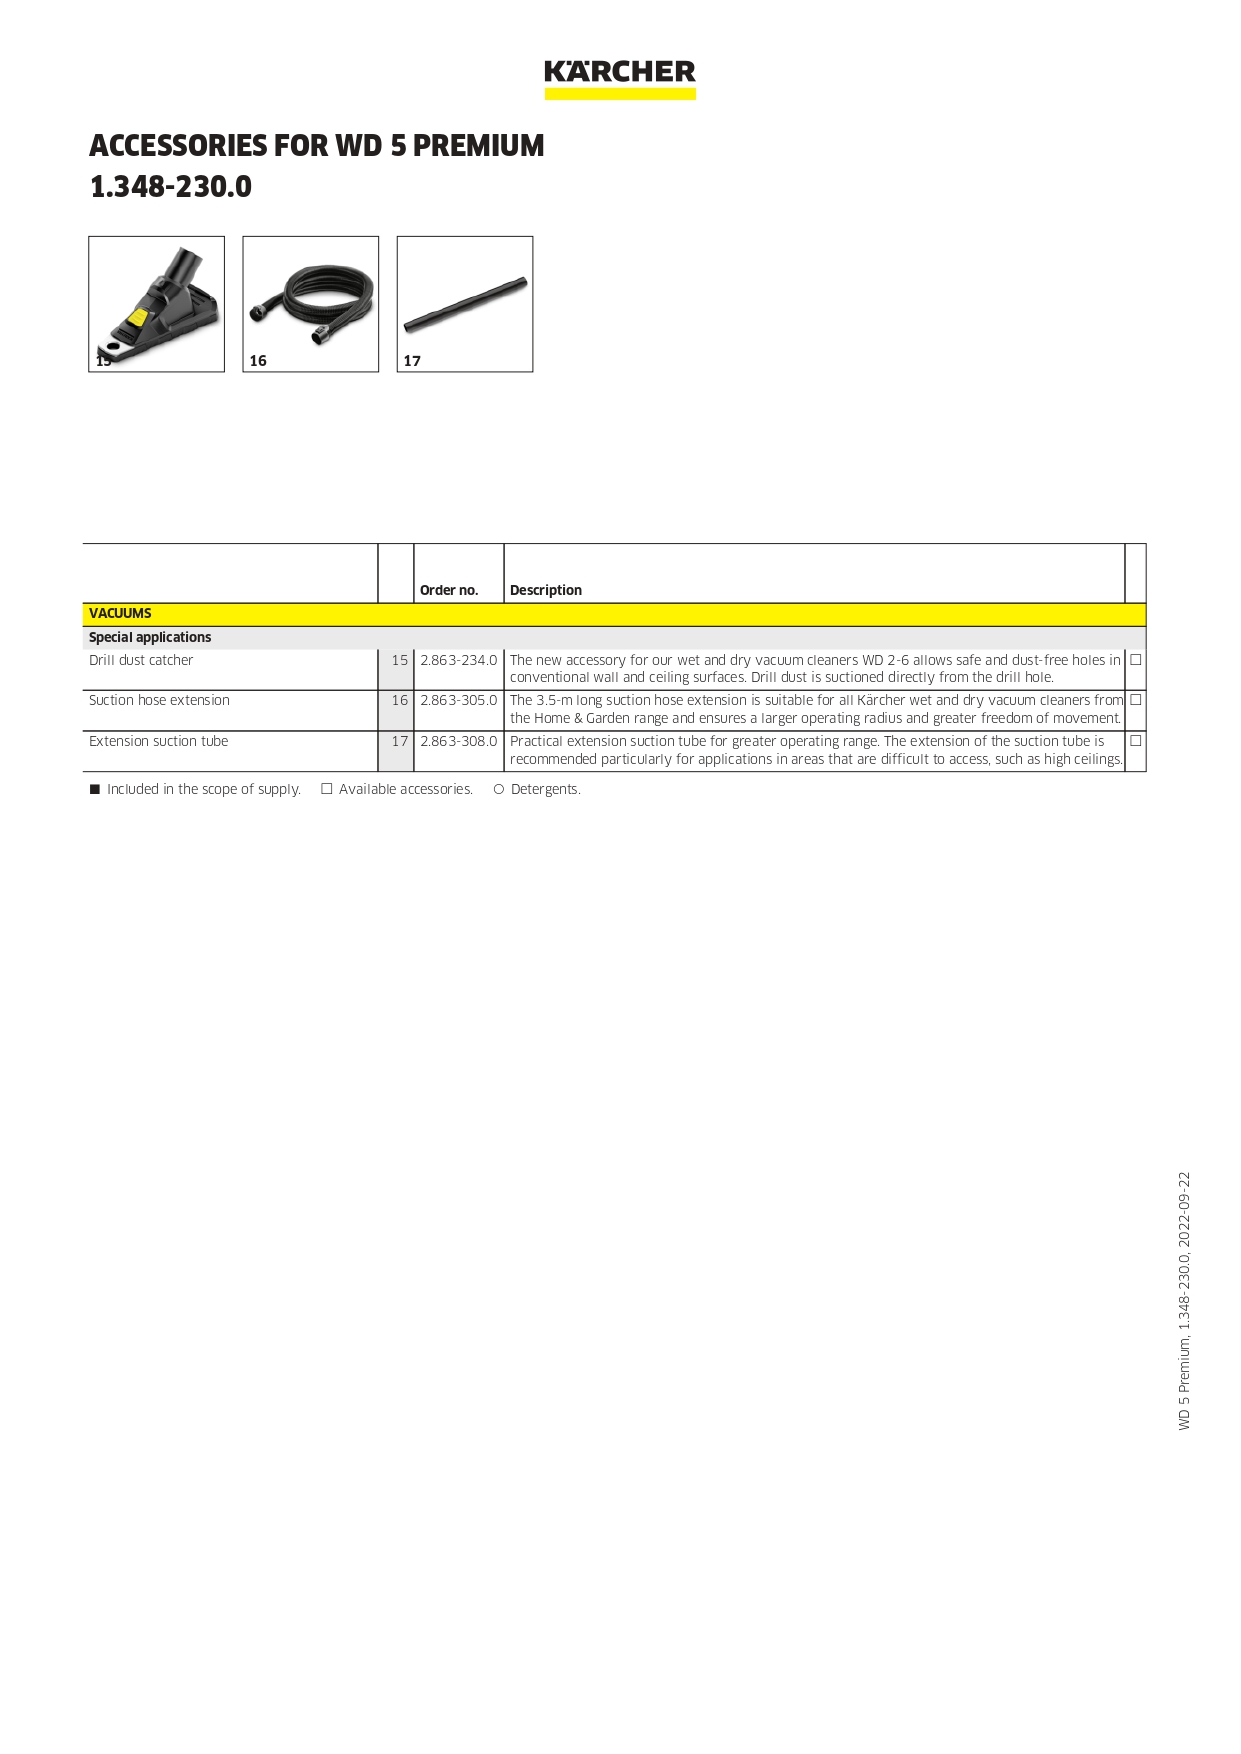 Karcher WD 5 Premium | Wet and Dry Vacuum Cleaner